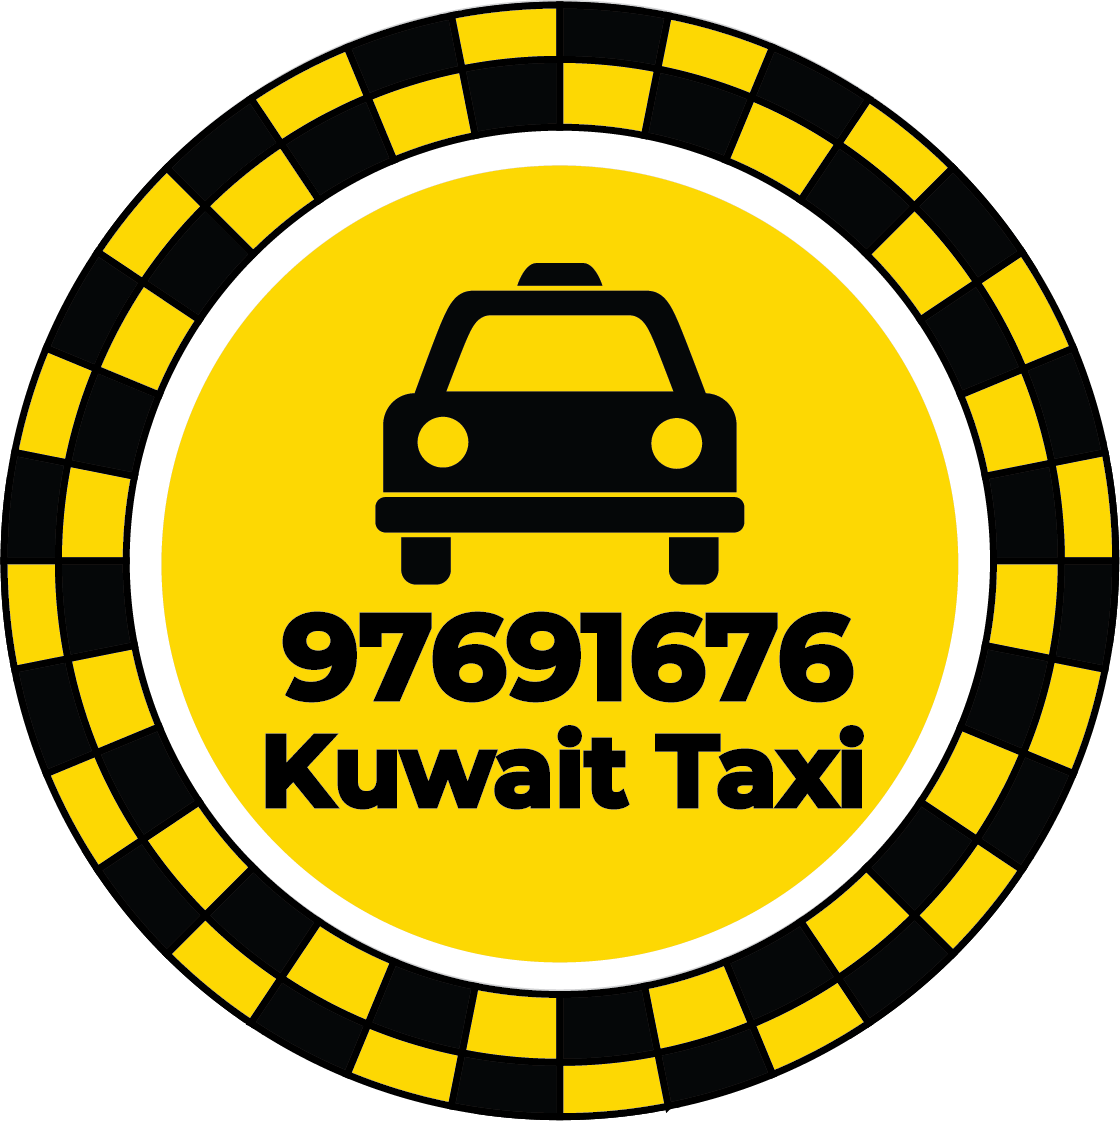 Taxi Service in Kuwait